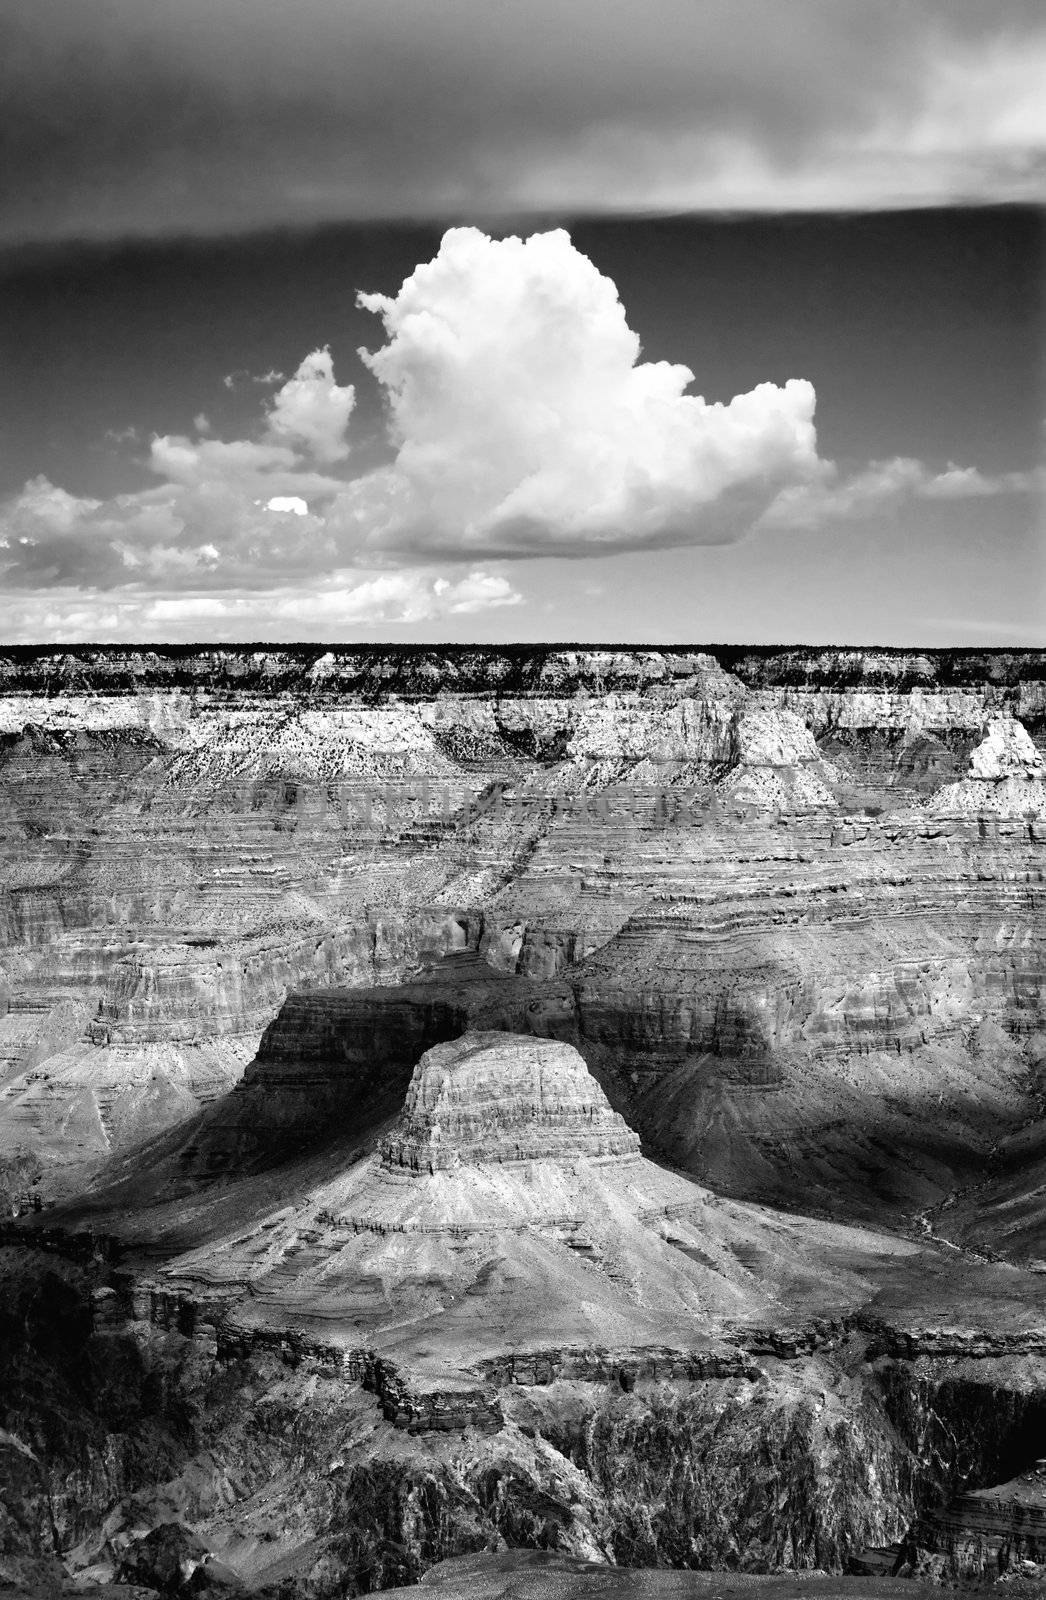 Large cumulus cloud formation above the Grand Canyon